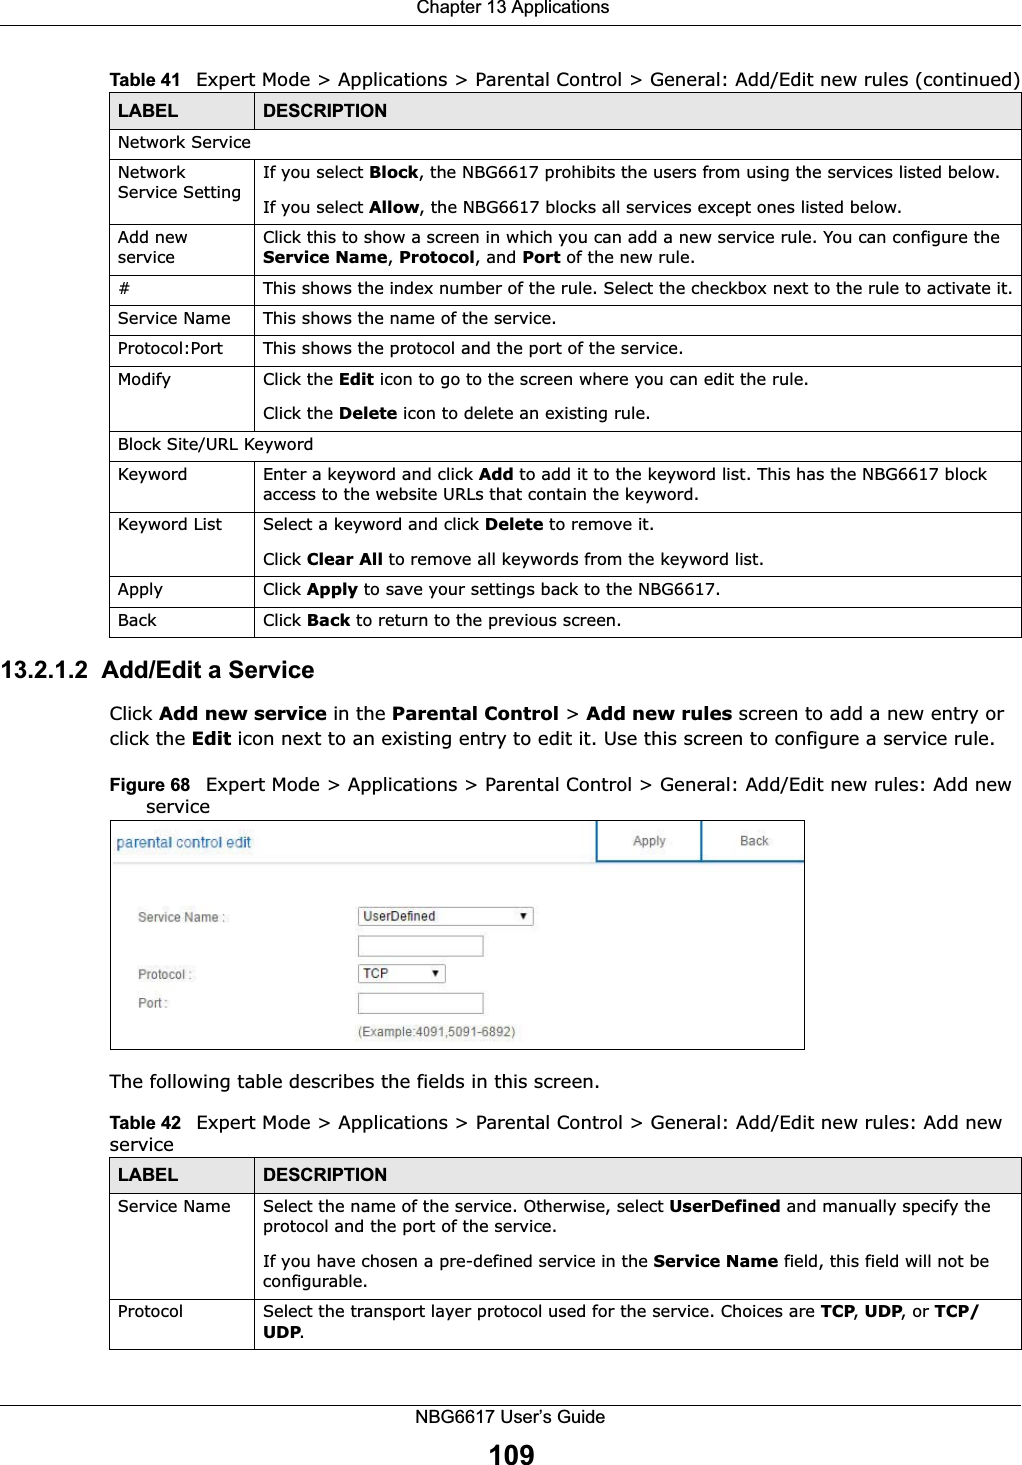  Chapter 13 ApplicationsNBG6617 User’s Guide10913.2.1.2  Add/Edit a ServiceClick Add new service in the Parental Control &gt; Add new rules screen to add a new entry or click the Edit icon next to an existing entry to edit it. Use this screen to configure a service rule.Figure 68   Expert Mode &gt; Applications &gt; Parental Control &gt; General: Add/Edit new rules: Add new service The following table describes the fields in this screen. Network ServiceNetwork Service Setting If you select Block, the NBG6617 prohibits the users from using the services listed below.If you select Allow, the NBG6617 blocks all services except ones listed below.Add new serviceClick this to show a screen in which you can add a new service rule. You can configure the Service Name, Protocol, and Port of the new rule.#This shows the index number of the rule. Select the checkbox next to the rule to activate it.Service Name This shows the name of the service.Protocol:Port This shows the protocol and the port of the service.Modify Click the Edit icon to go to the screen where you can edit the rule.Click the Delete icon to delete an existing rule.Block Site/URL KeywordKeyword Enter a keyword and click Add to add it to the keyword list. This has the NBG6617 block access to the website URLs that contain the keyword.Keyword List Select a keyword and click Delete to remove it. Click Clear All to remove all keywords from the keyword list.Apply Click Apply to save your settings back to the NBG6617.Back Click Back to return to the previous screen.Table 41   Expert Mode &gt; Applications &gt; Parental Control &gt; General: Add/Edit new rules (continued)LABEL DESCRIPTIONTable 42   Expert Mode &gt; Applications &gt; Parental Control &gt; General: Add/Edit new rules: Add new serviceLABEL DESCRIPTIONService Name Select the name of the service. Otherwise, select UserDefined and manually specify the protocol and the port of the service.If you have chosen a pre-defined service in the Service Name field, this field will not be configurable.Protocol Select the transport layer protocol used for the service. Choices are TCP, UDP, or TCP/UDP. 